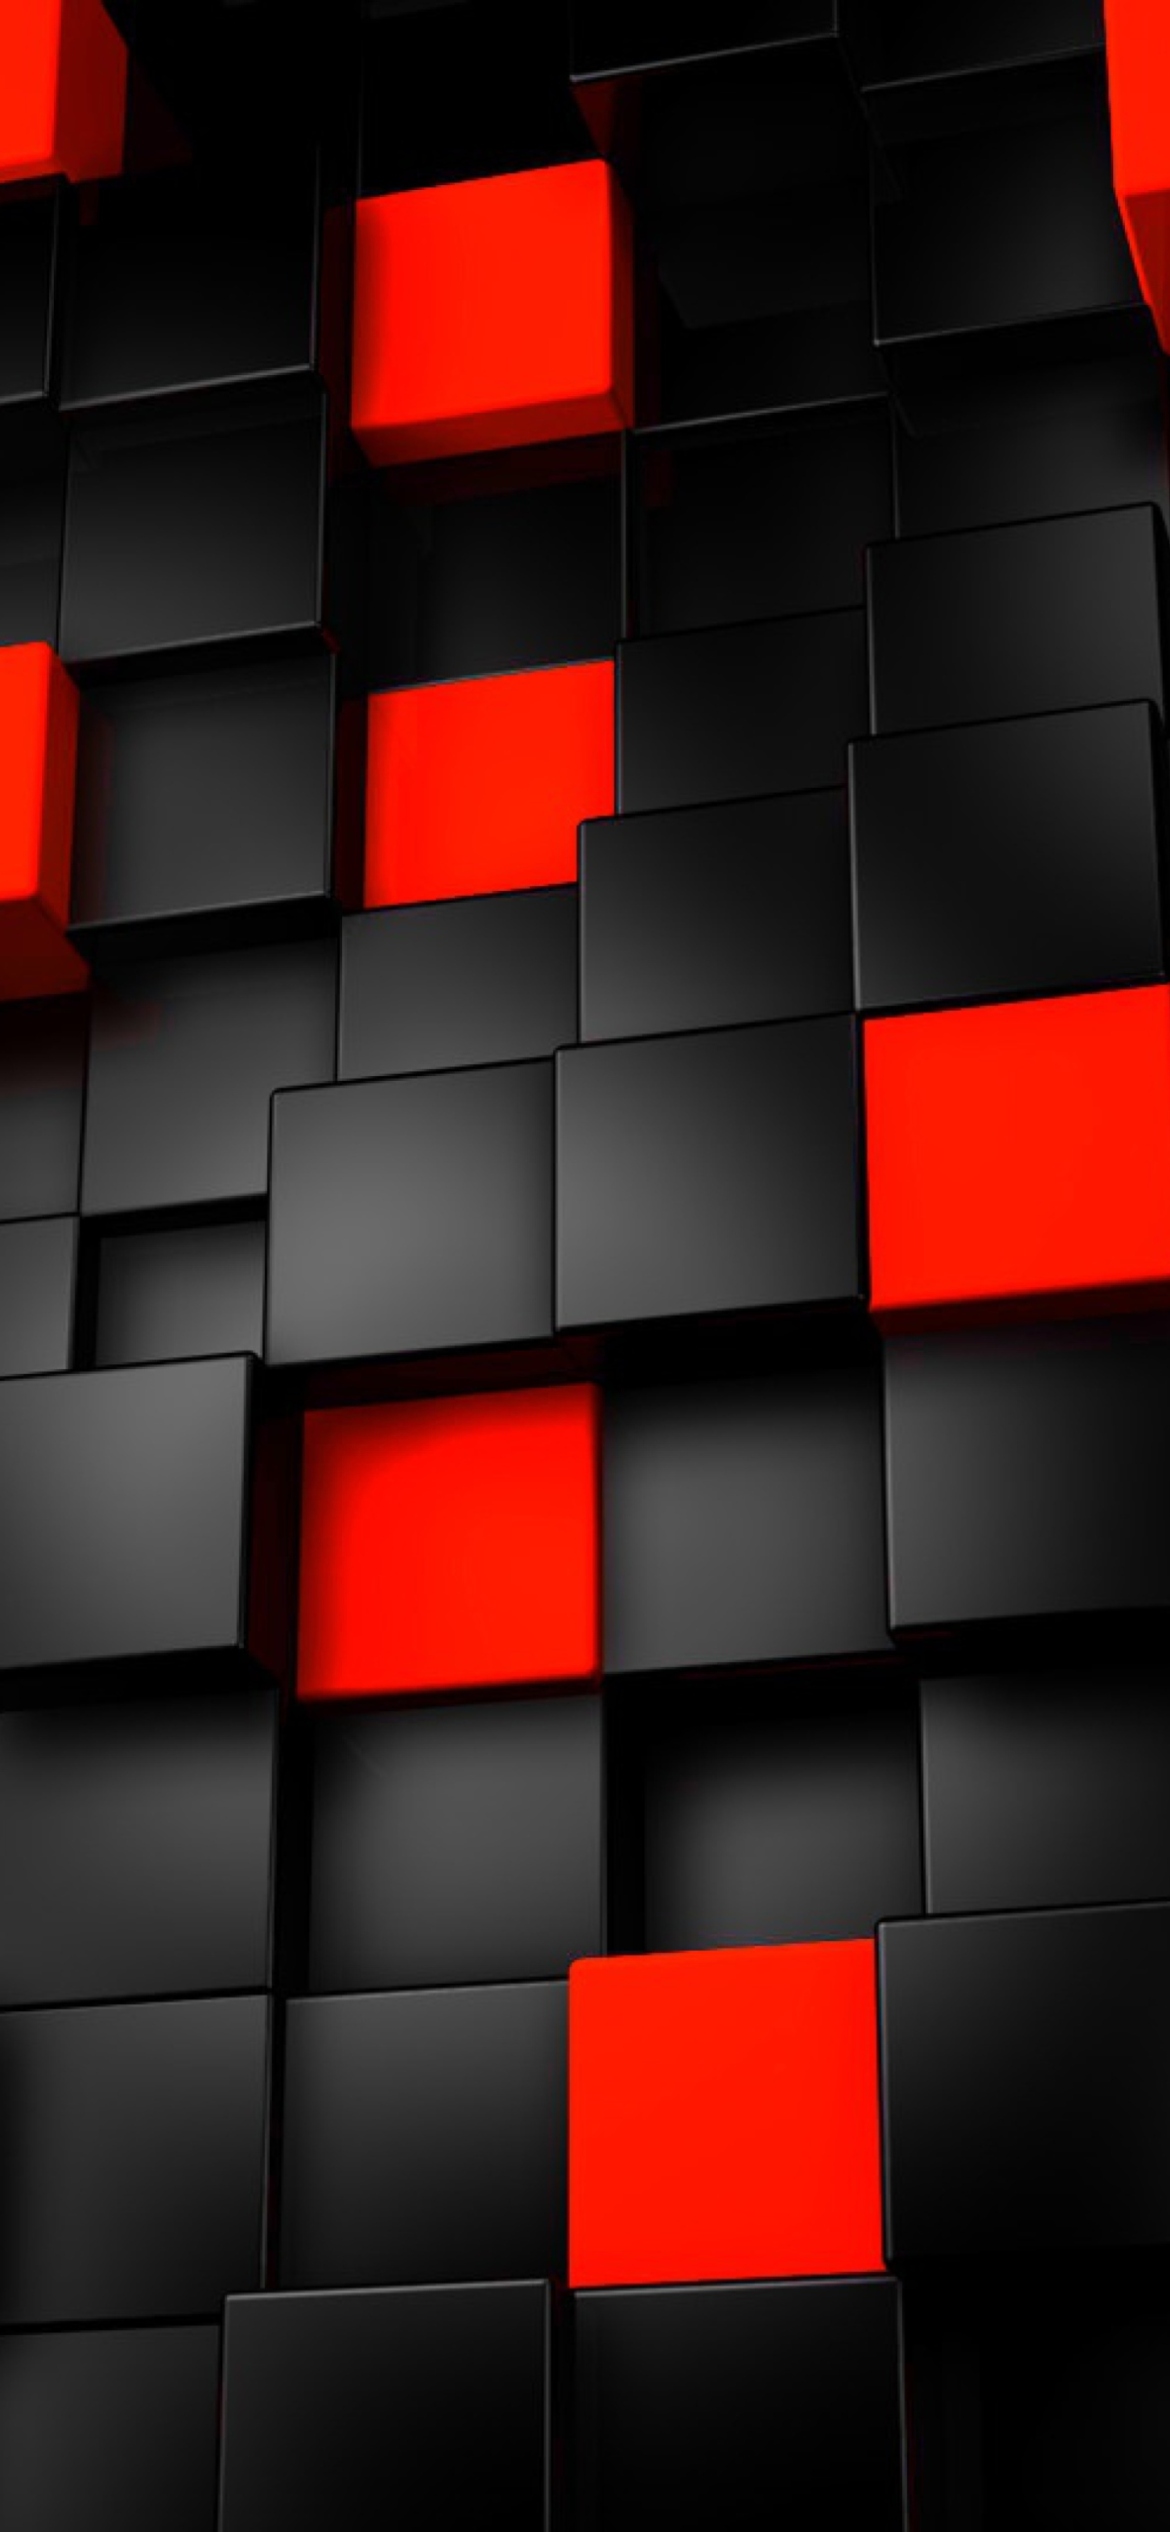 Abstract Black And Red Cubes screenshot #1 1170x2532